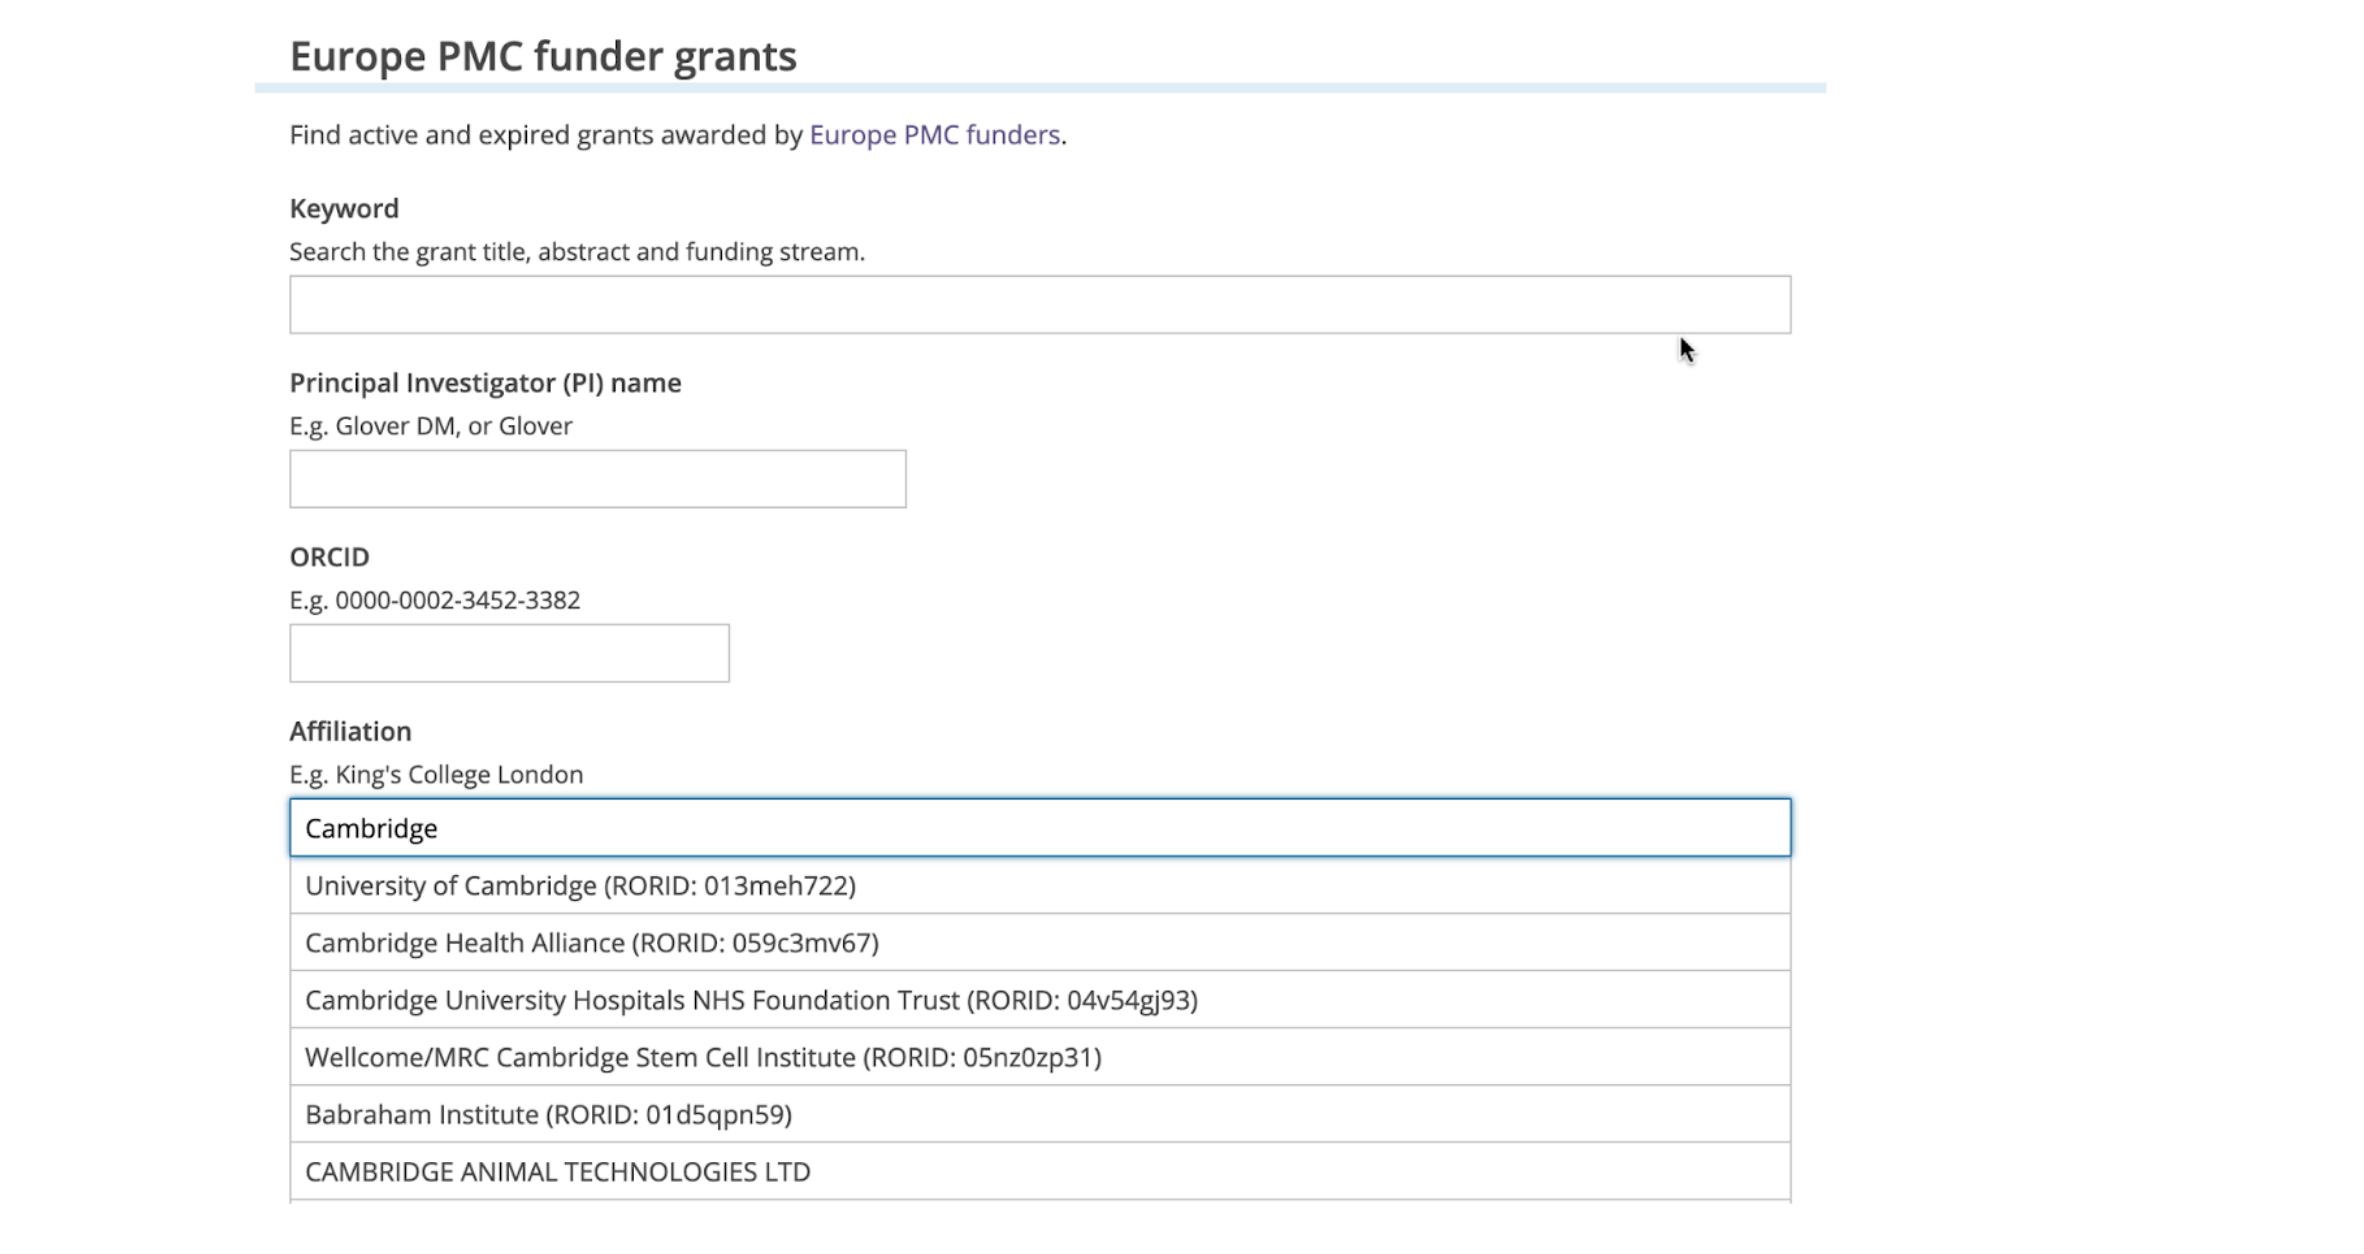 Screenshot of ROR affiliation picker in Europe PMC grant form